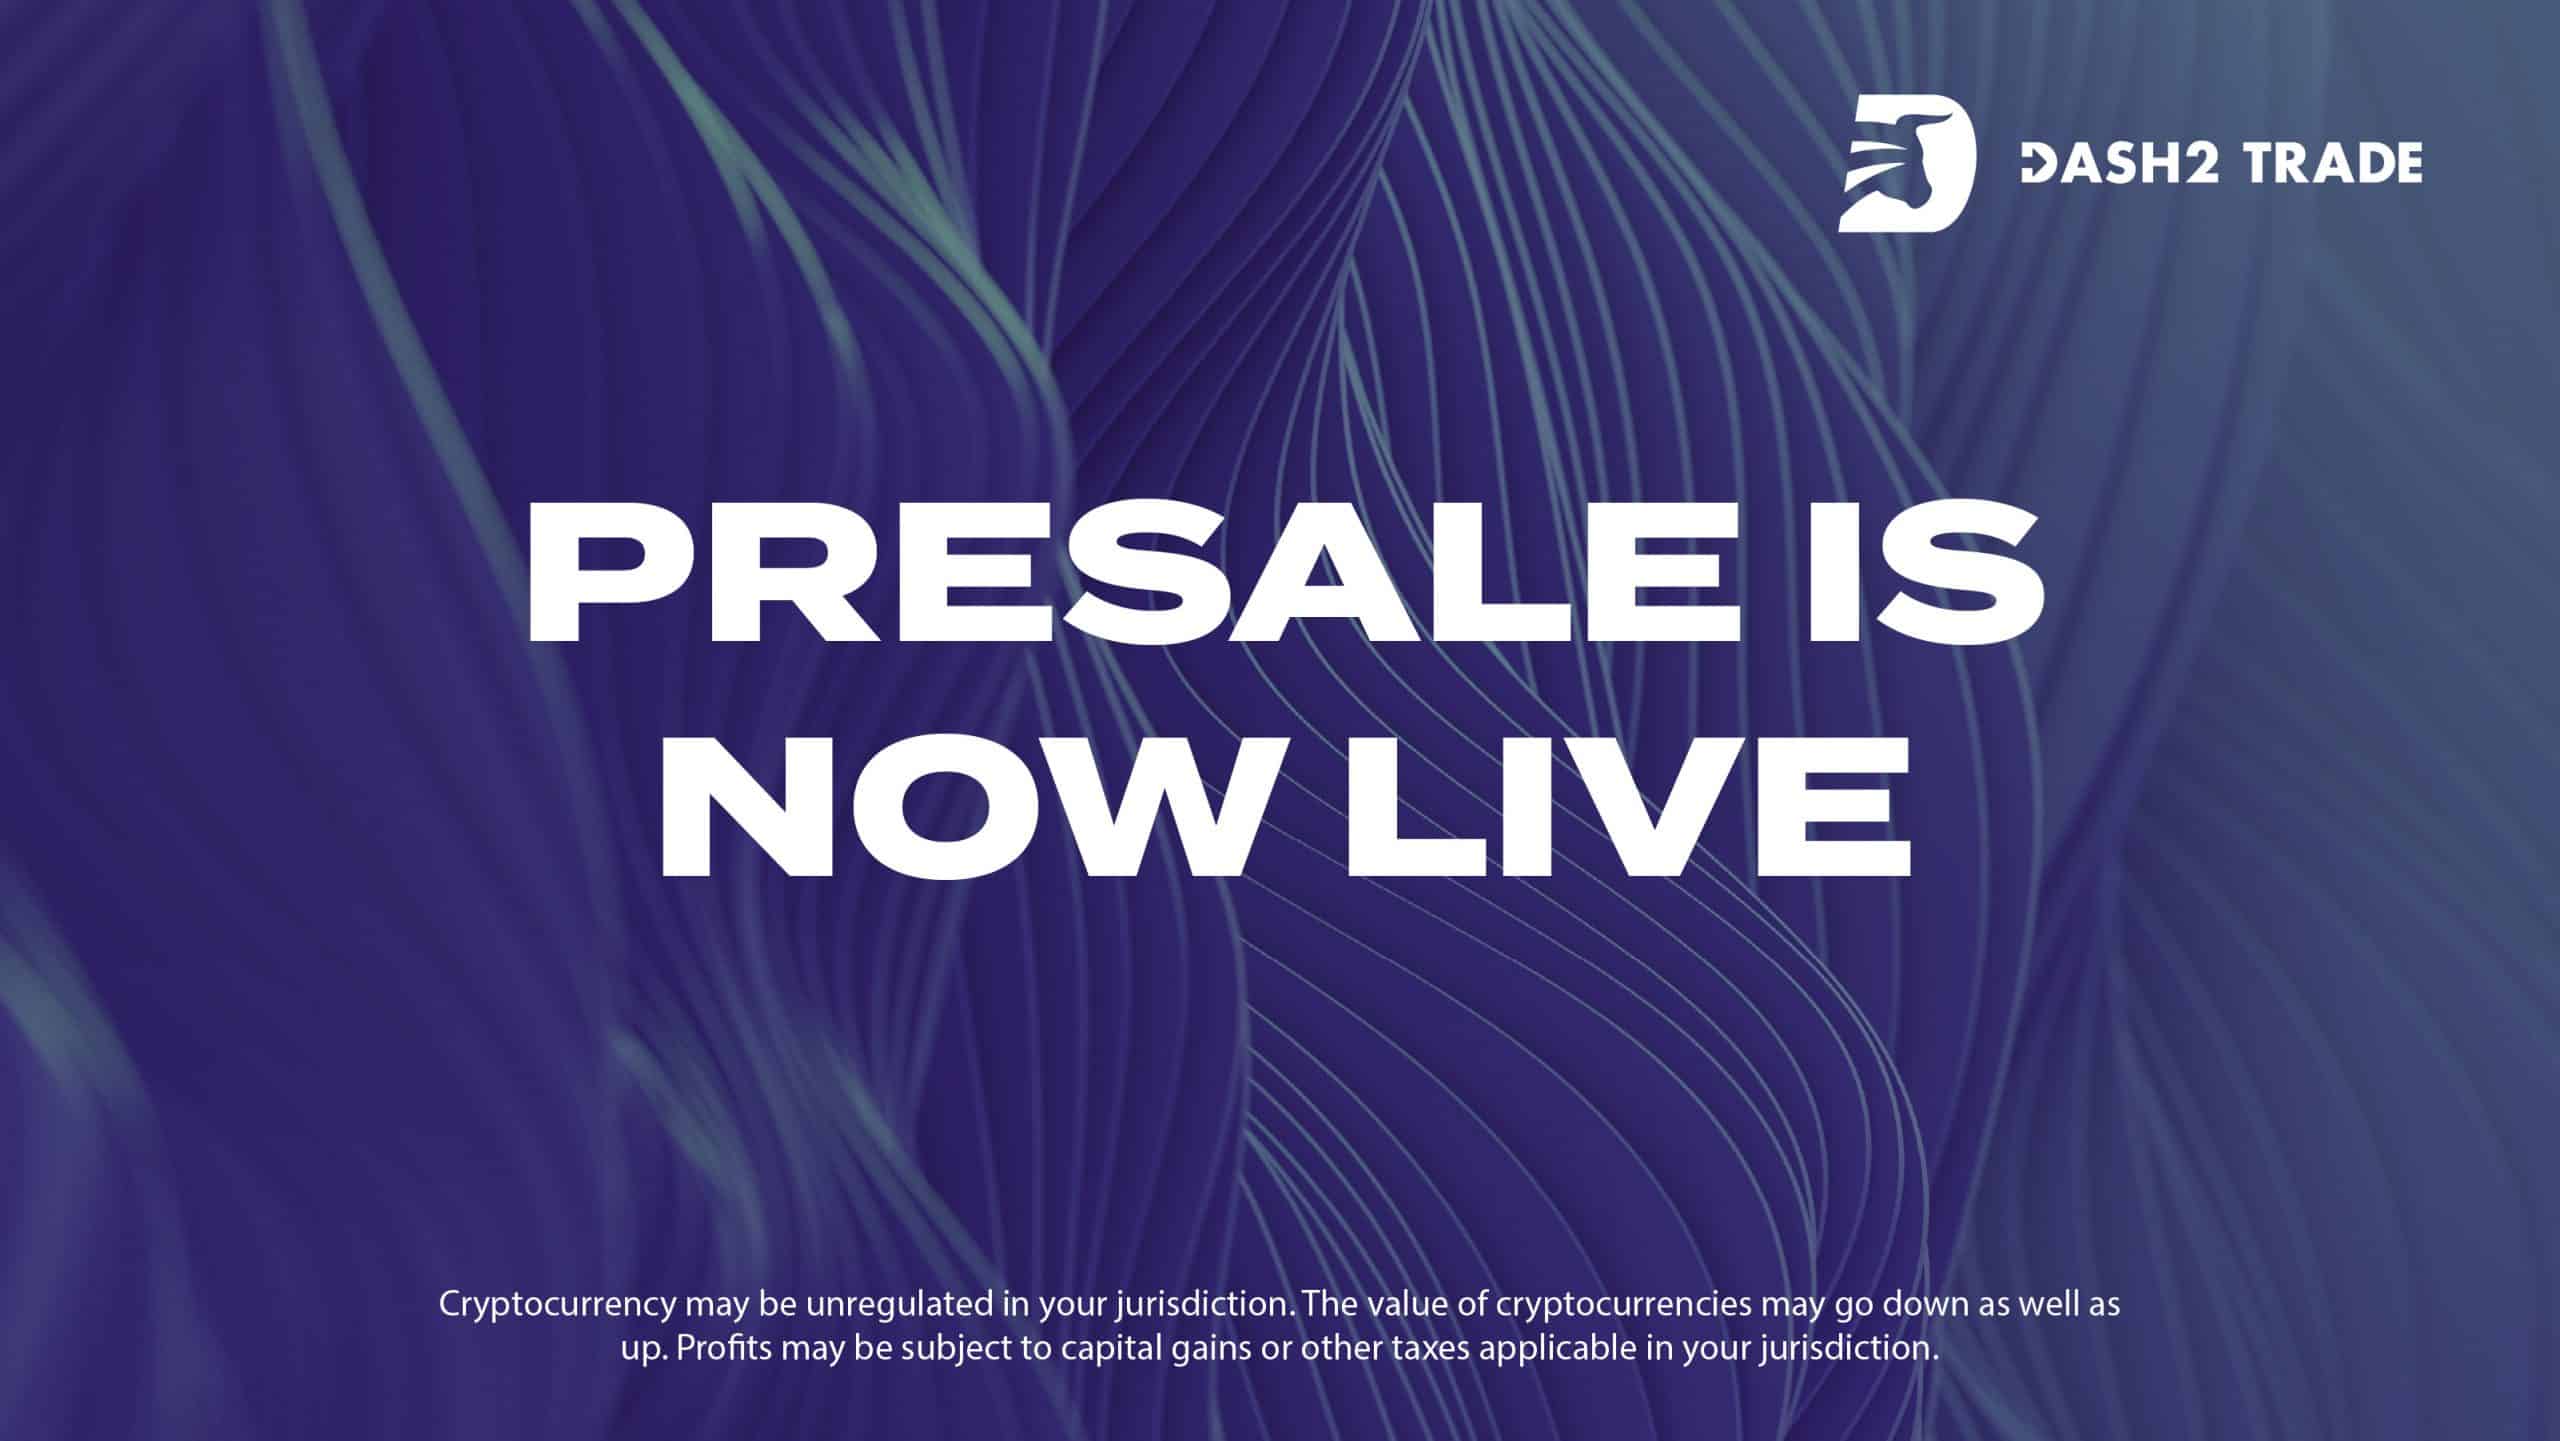 dash-2-trade-crypto-presale-blasts-past-2-7-million-how-to-buy-early (1)